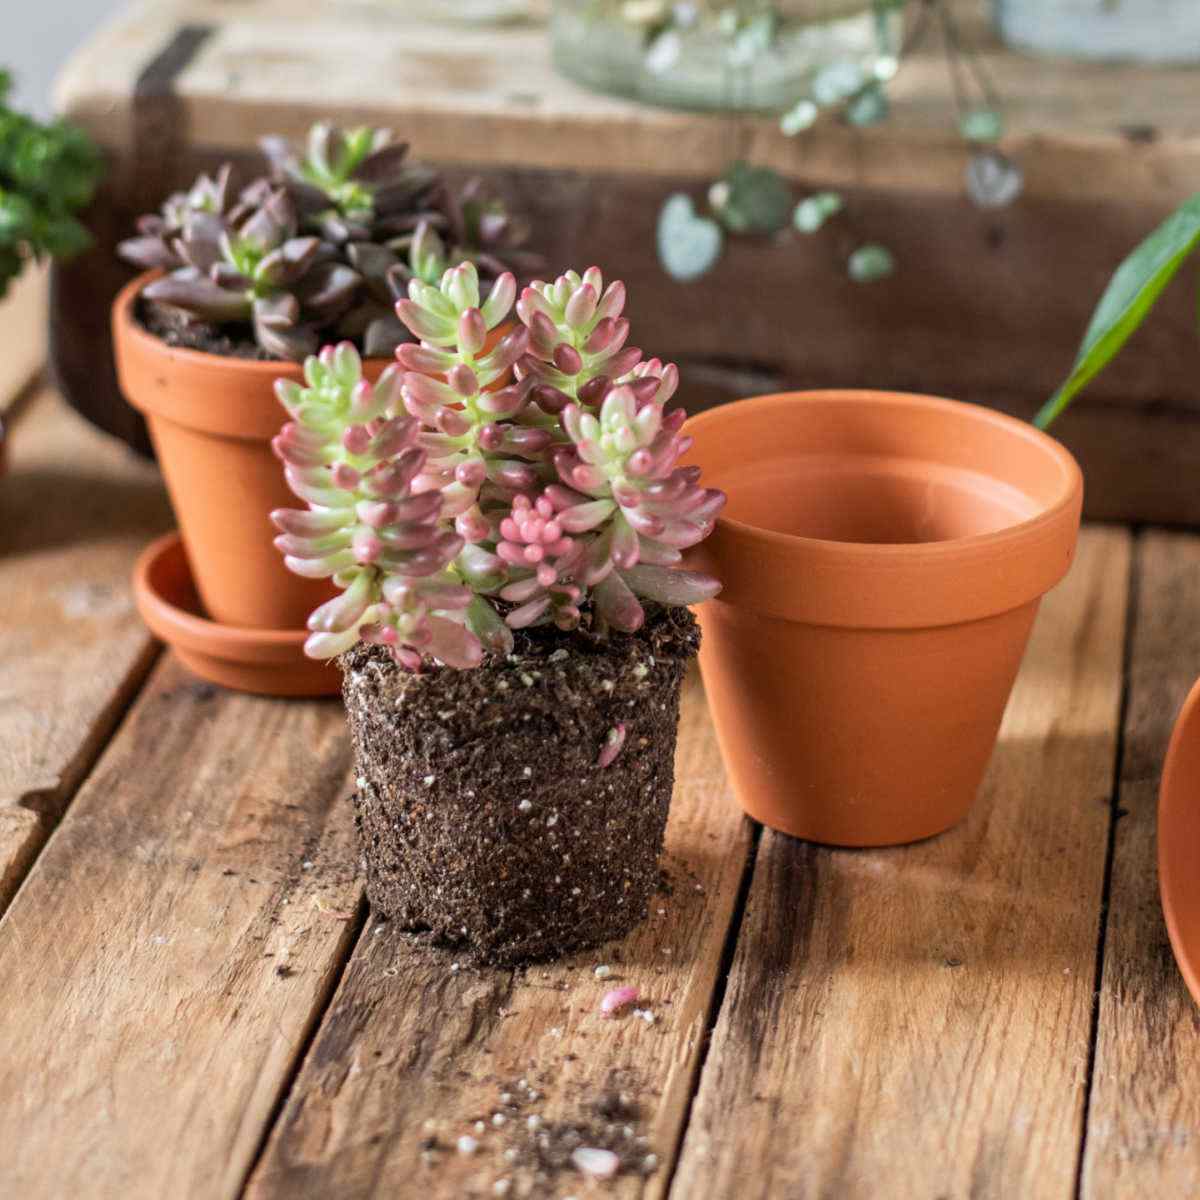 Pots and succulents on a wooden table with showing roots and soils.